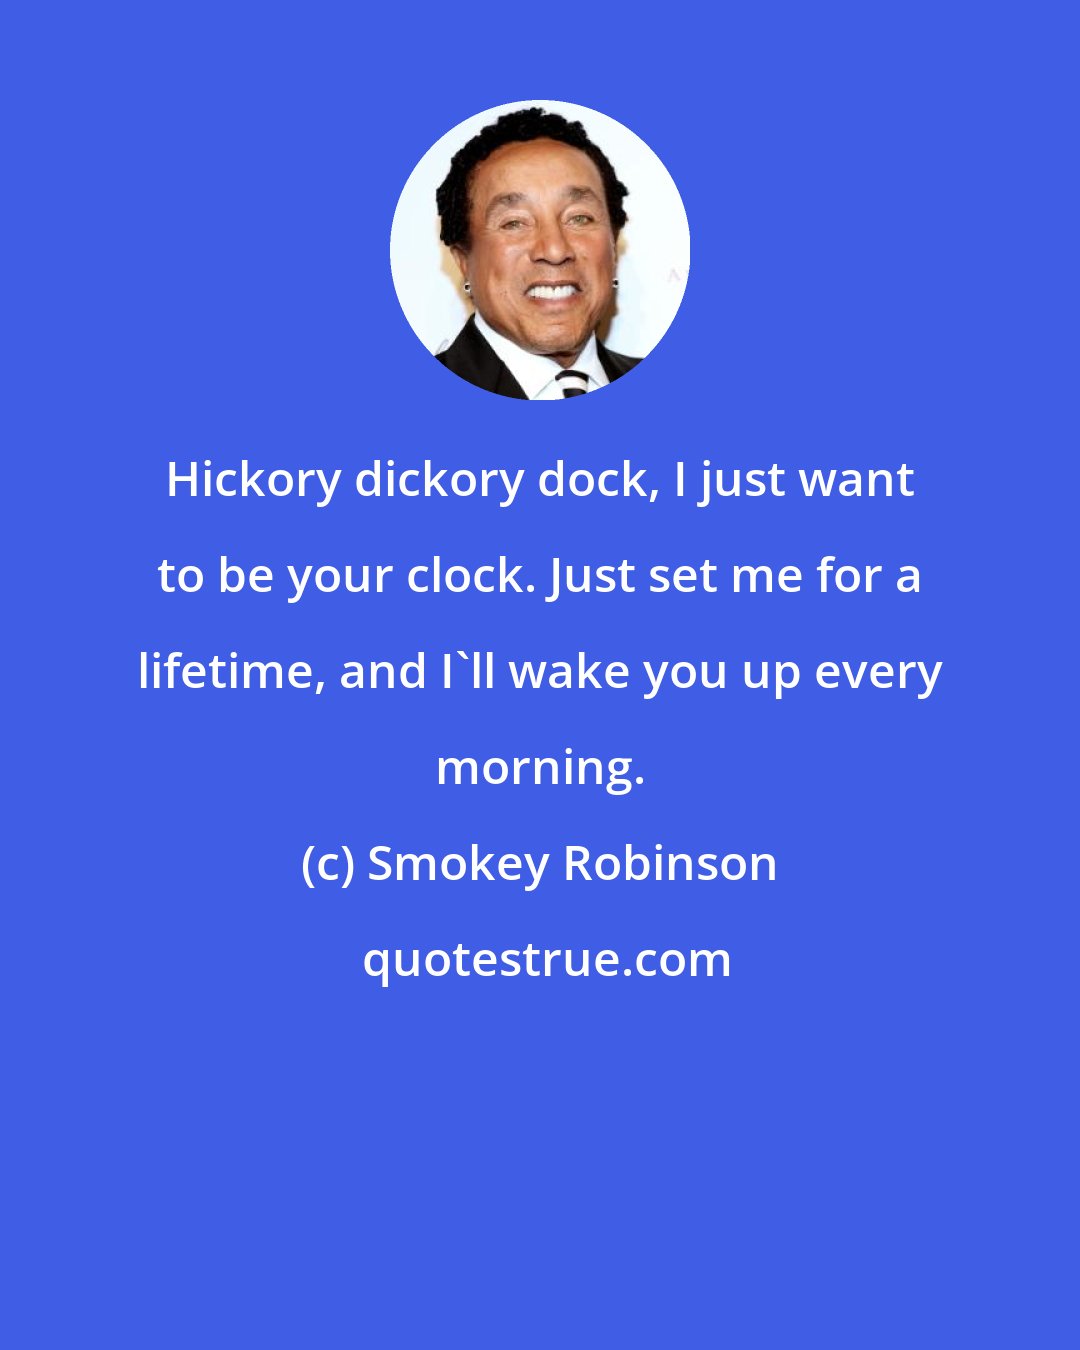 Smokey Robinson: Hickory dickory dock, I just want to be your clock. Just set me for a lifetime, and I'll wake you up every morning.